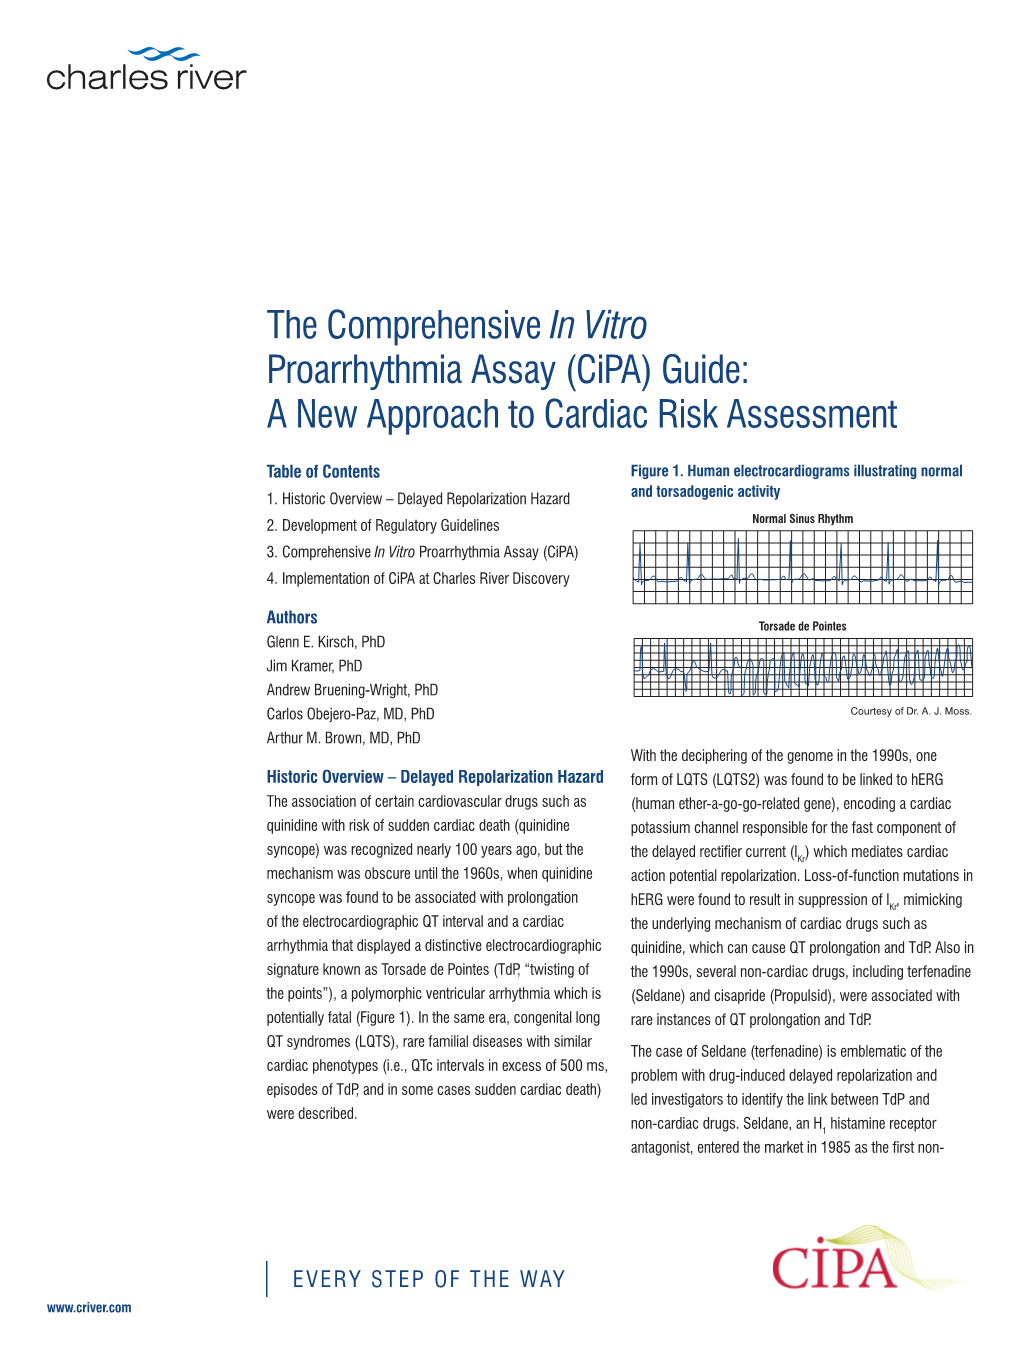 The Comprehensive in Vitro Proarrhythmia Assay (Cipa) Guide: a New Approach to Cardiac Risk Assessment